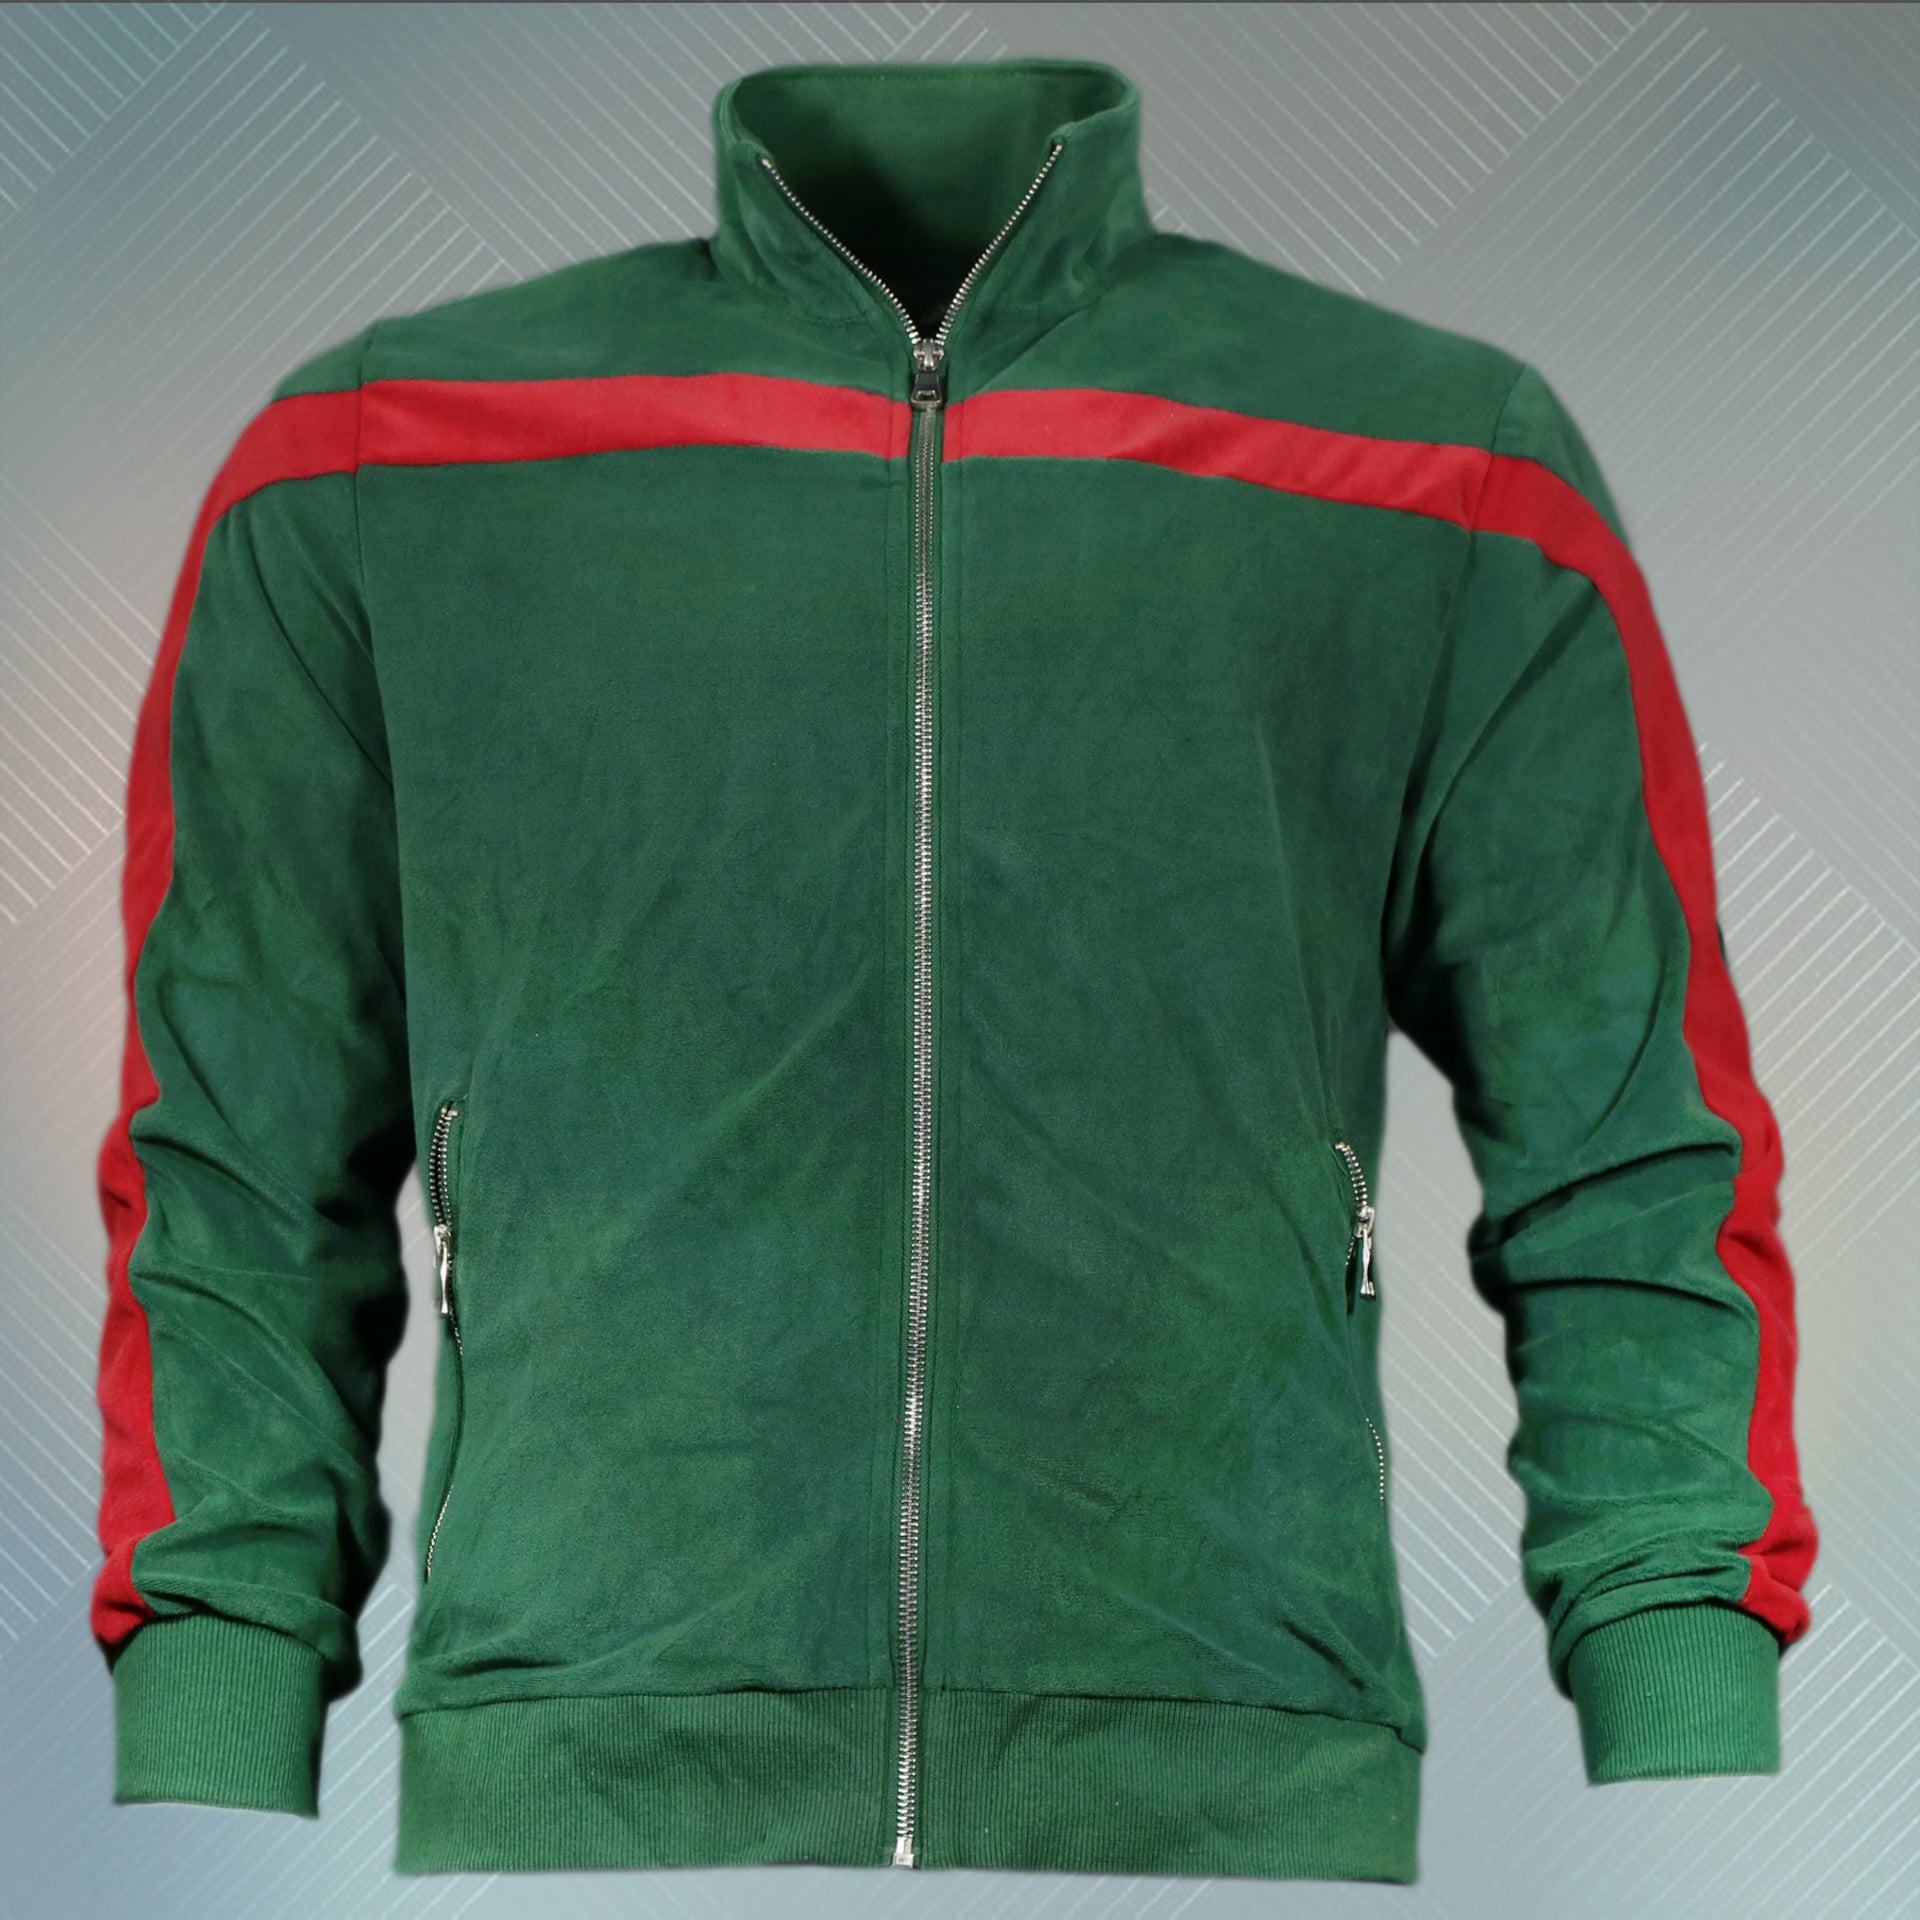 Track Jacket | Snake and Bees Italian Fashion Green Red Stripe Zip Up